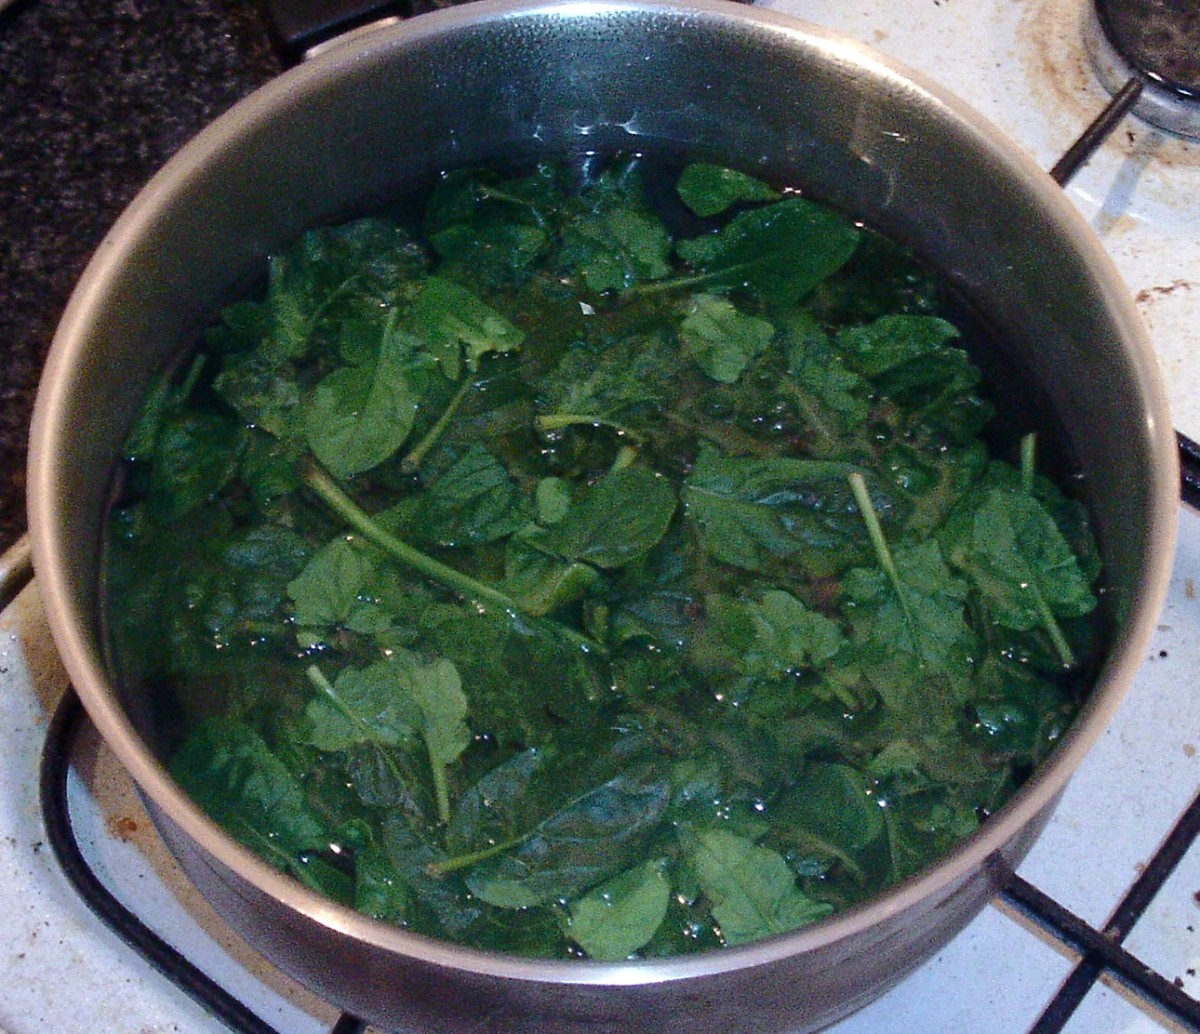 Spinach is blanched in boiling salted water